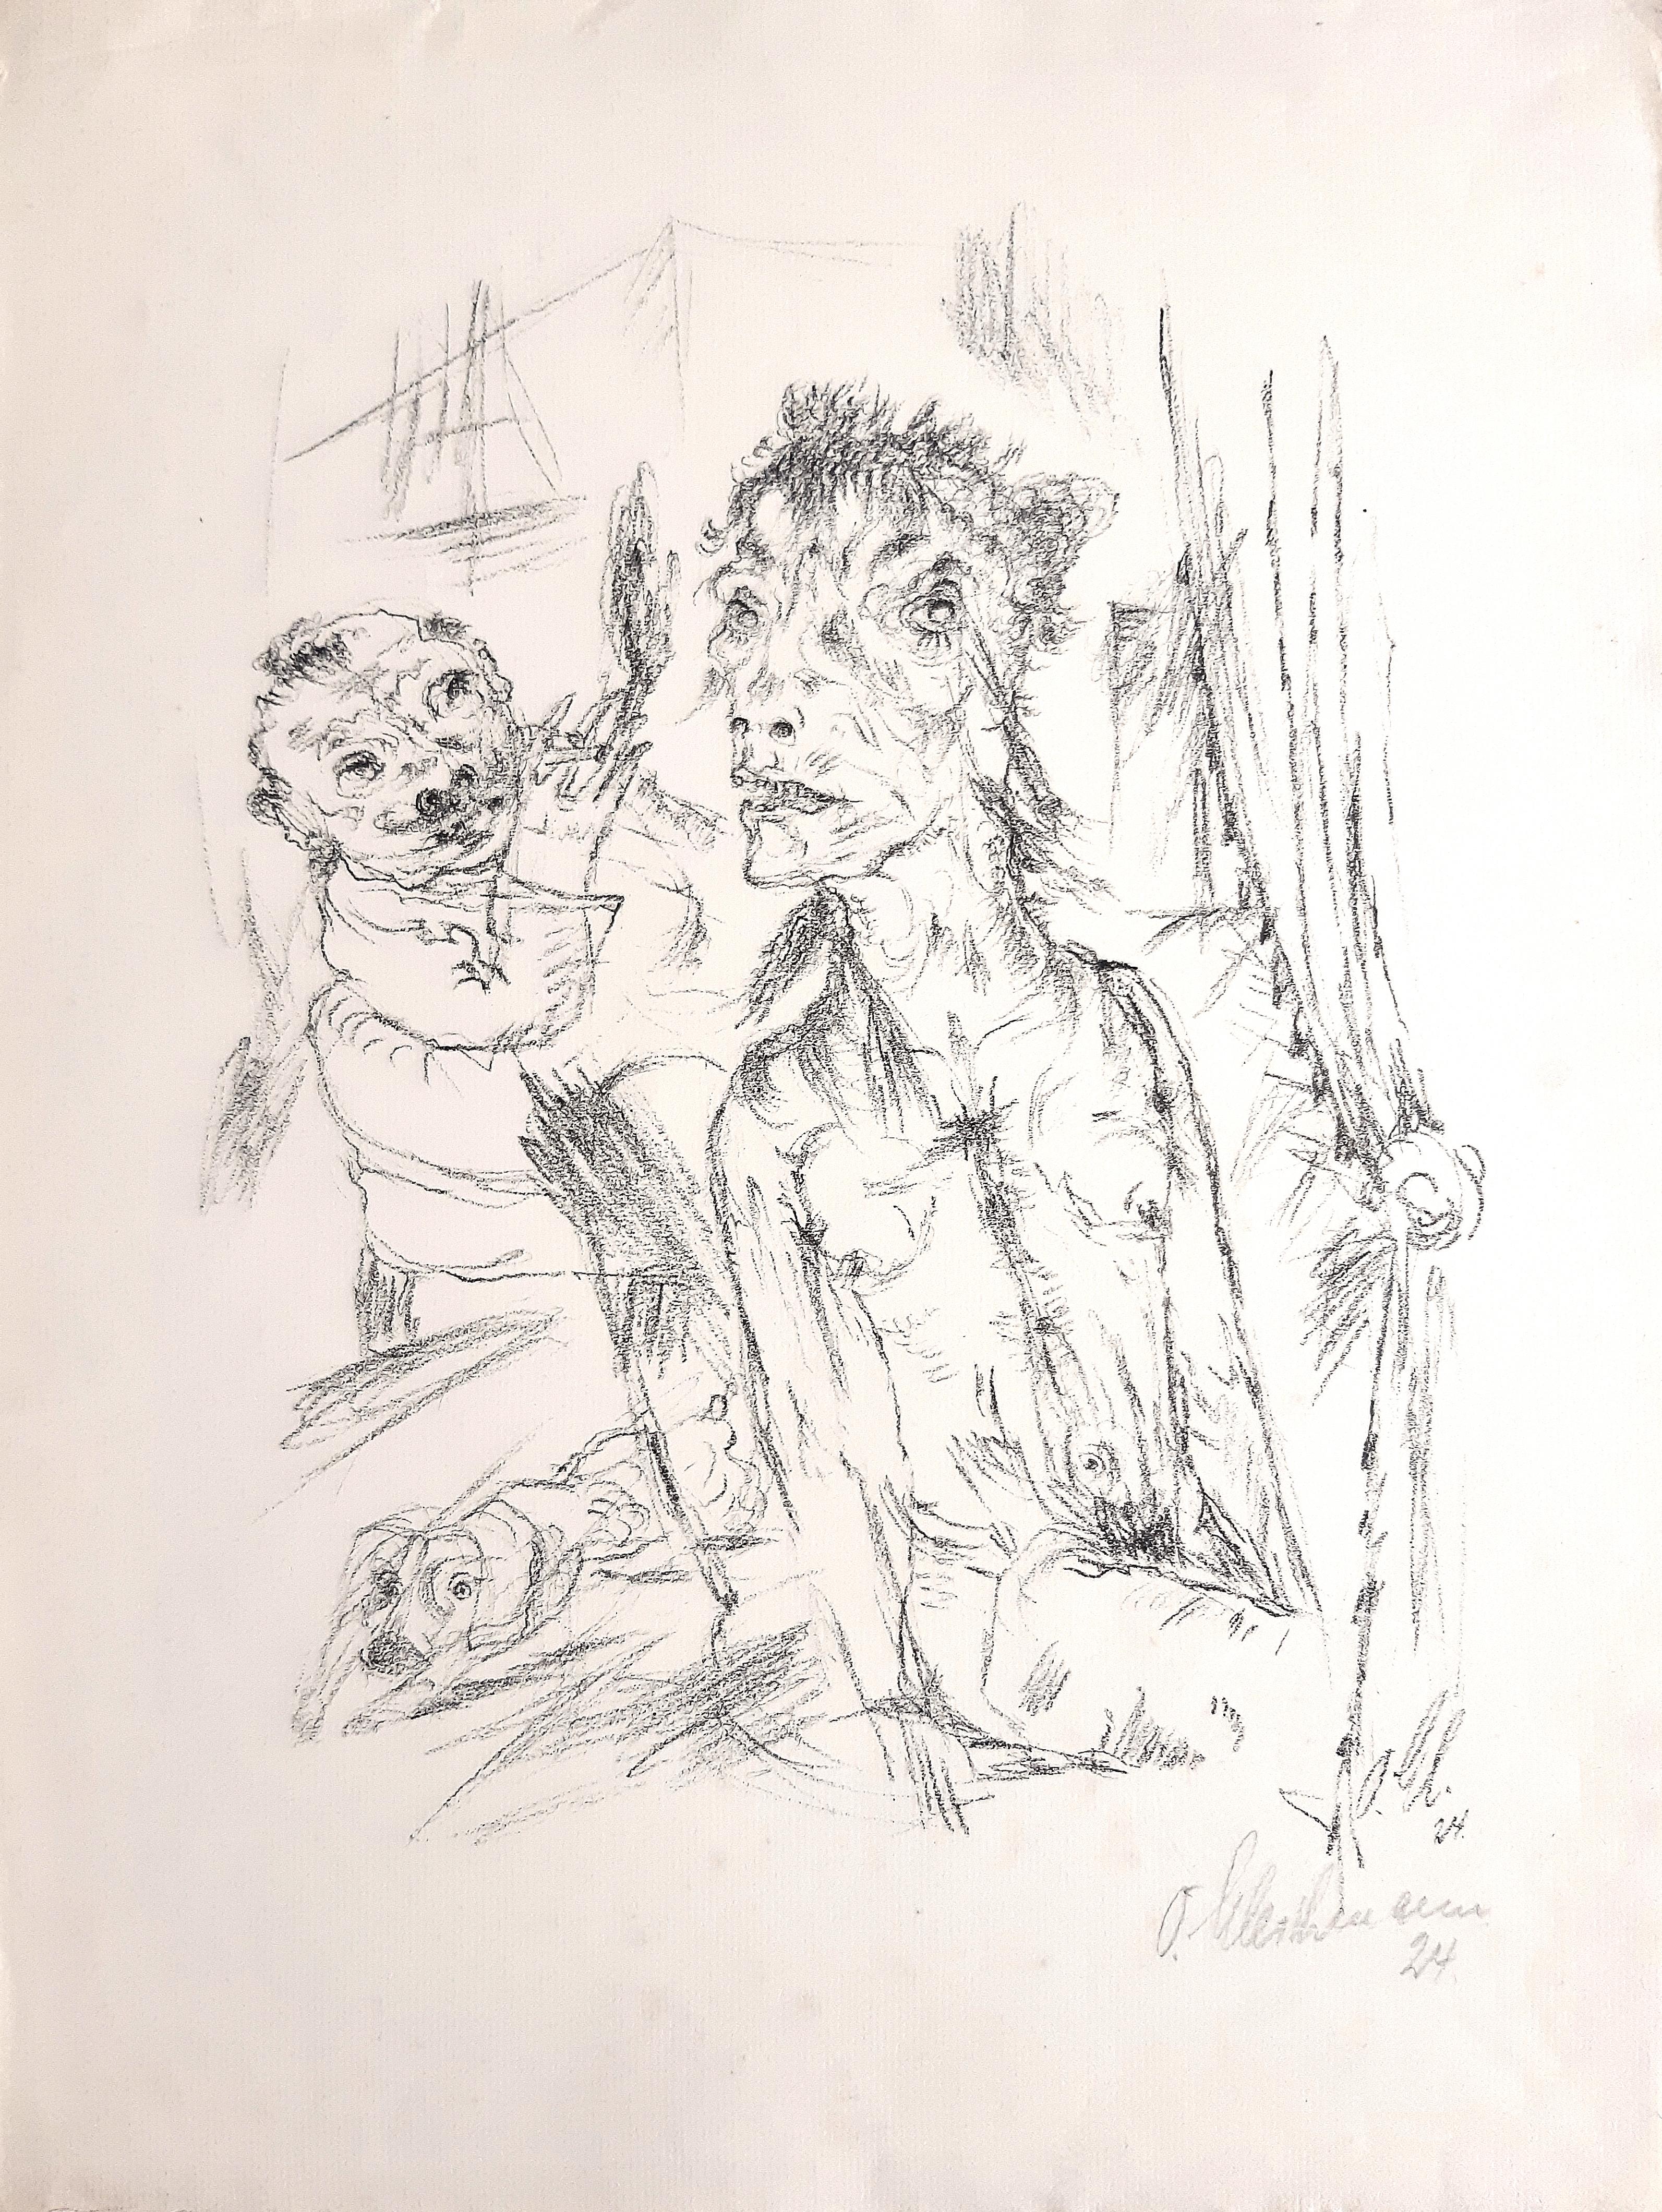 Bordellszene is an original lithograph, realized by Otto Gleichmann in 1924, hand- signed and dated.

In very good conditions.

Here the artwork represents two men in Expressionistic expression with strong and quick lines, at the same time fragile